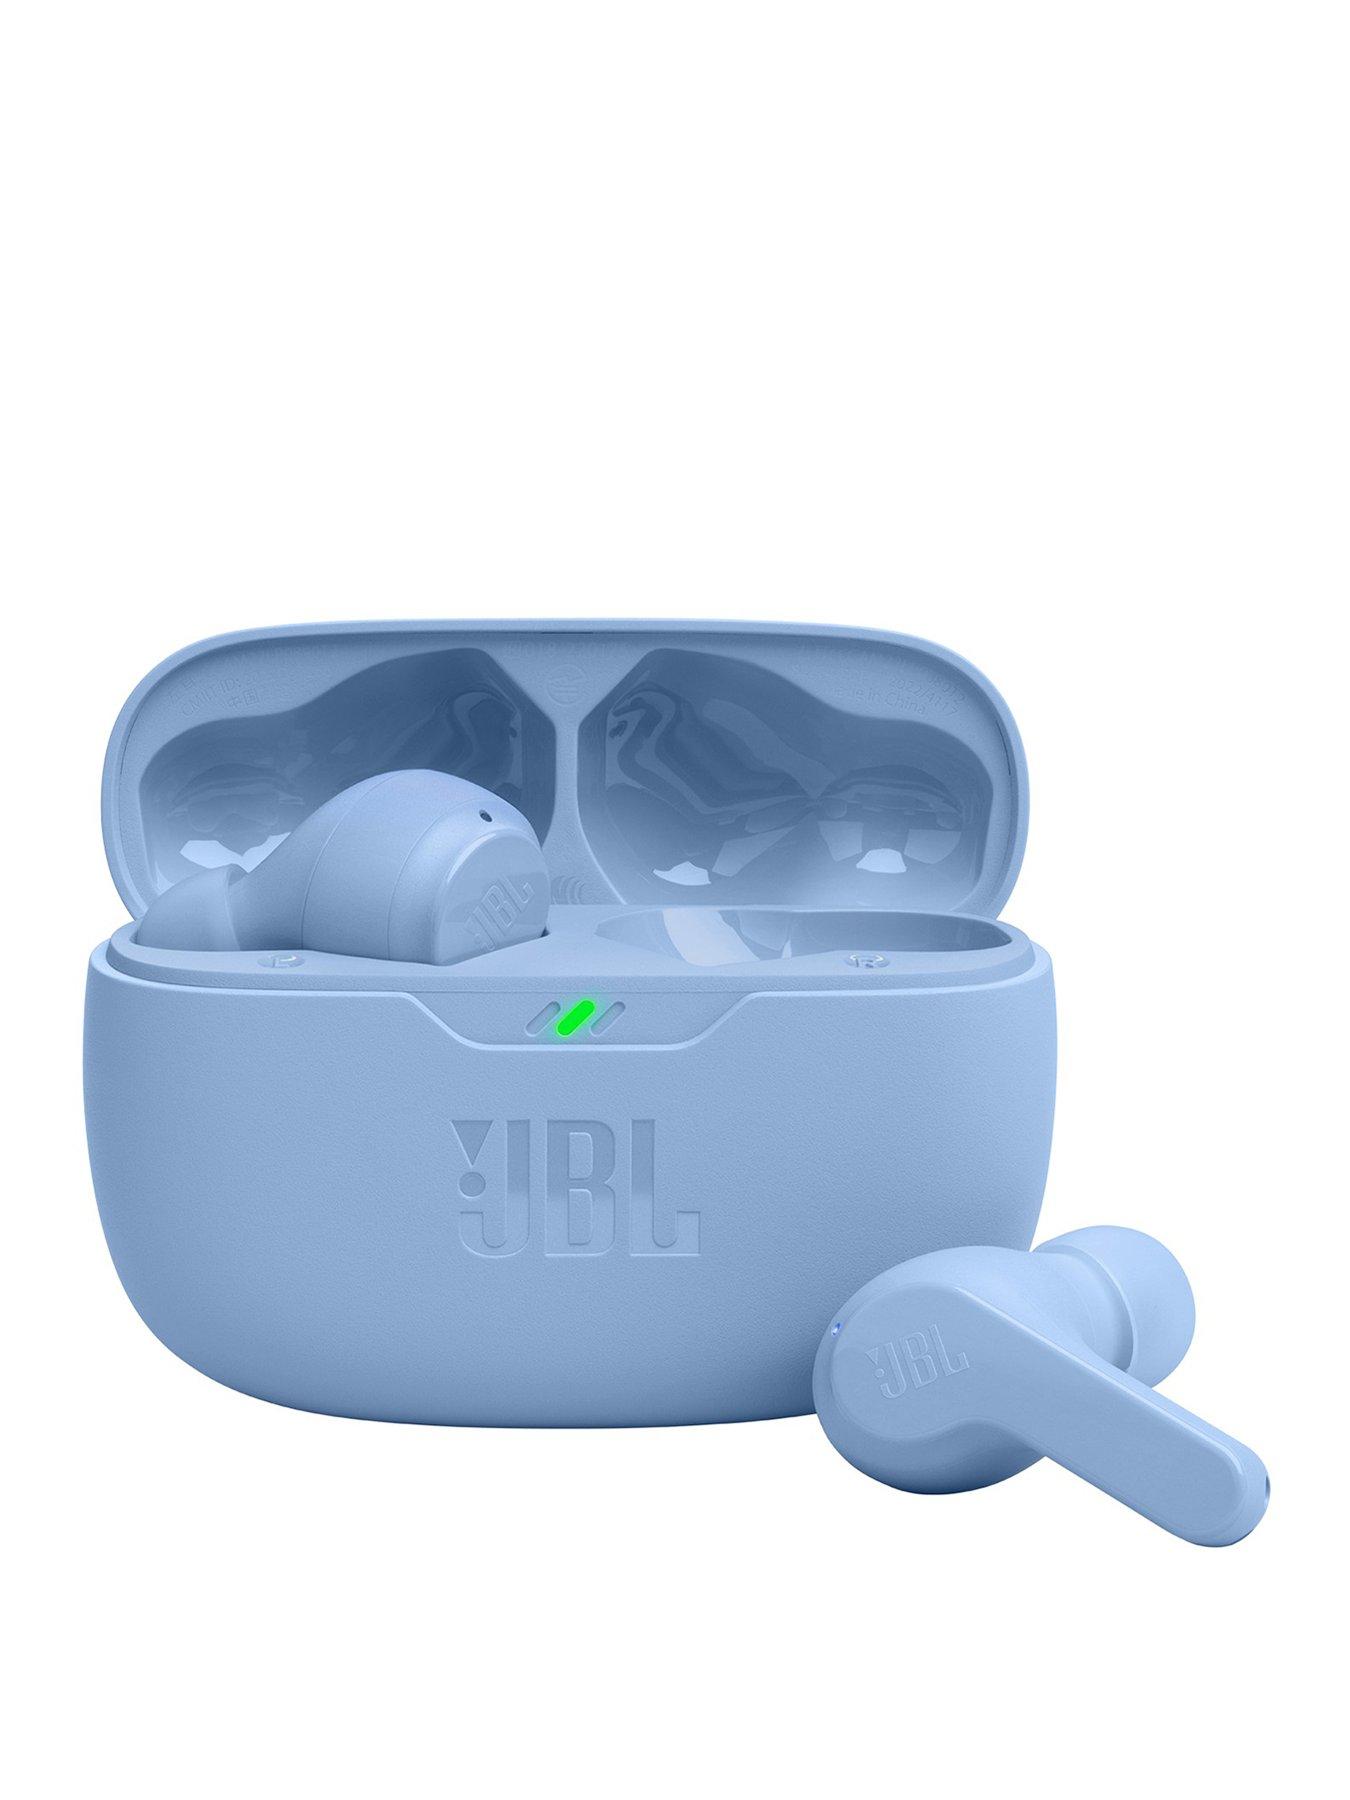 Customer Reviews: JBL Live Pro 2 TWS (Blue) True wireless earbuds with  active noise cancellation at Crutchfield